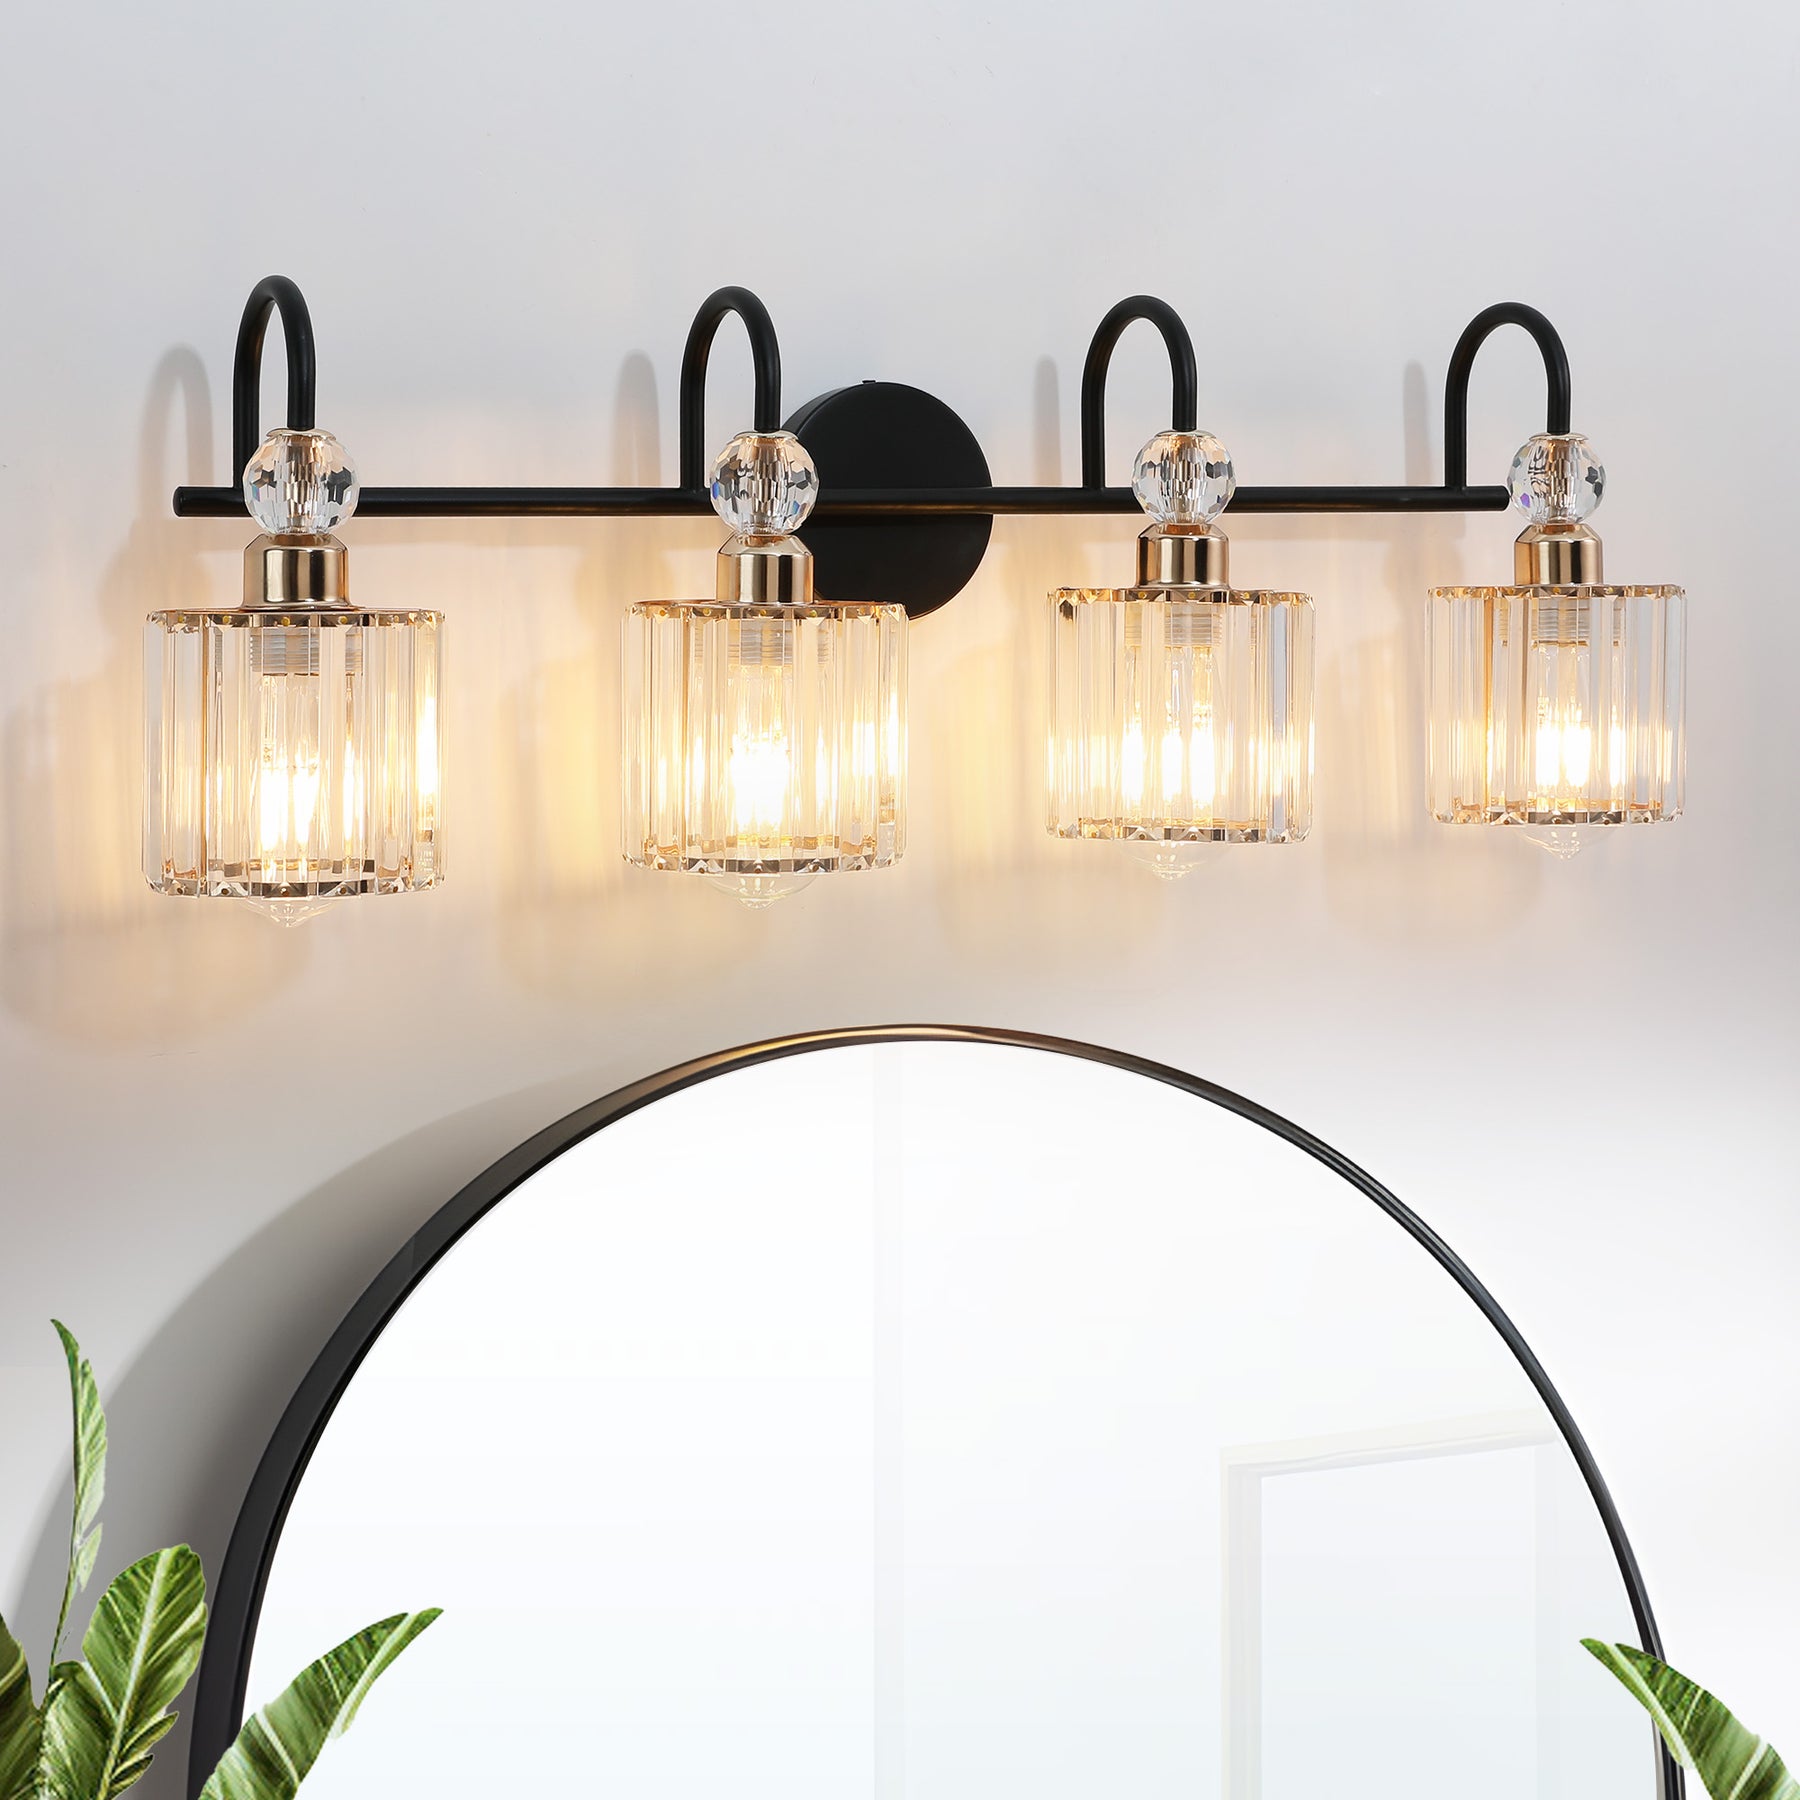 3 Light Bathroom Light Fixtures, Modern Black Vanity Lights Over Mirror,  Wall Sconce with Clear Glass Shade and Metal Base, Matte Black Vanity Lights  for Bathroom 